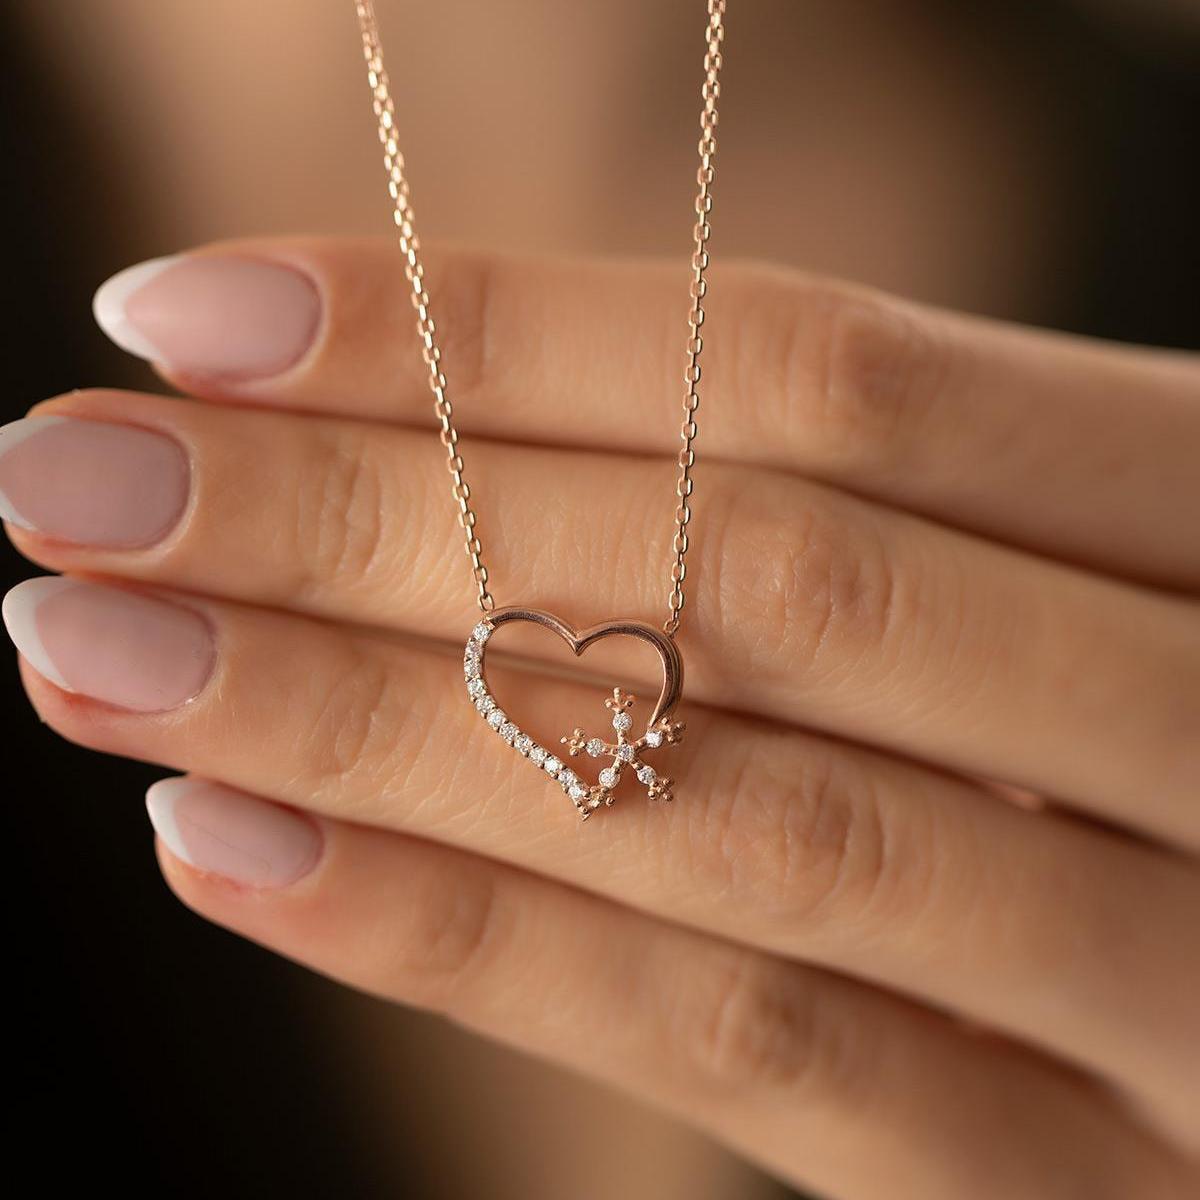 Heart Necklace Diamond • Snowflake Necklace Diamond • 925 Cz Necklace - Trending Silver Gifts